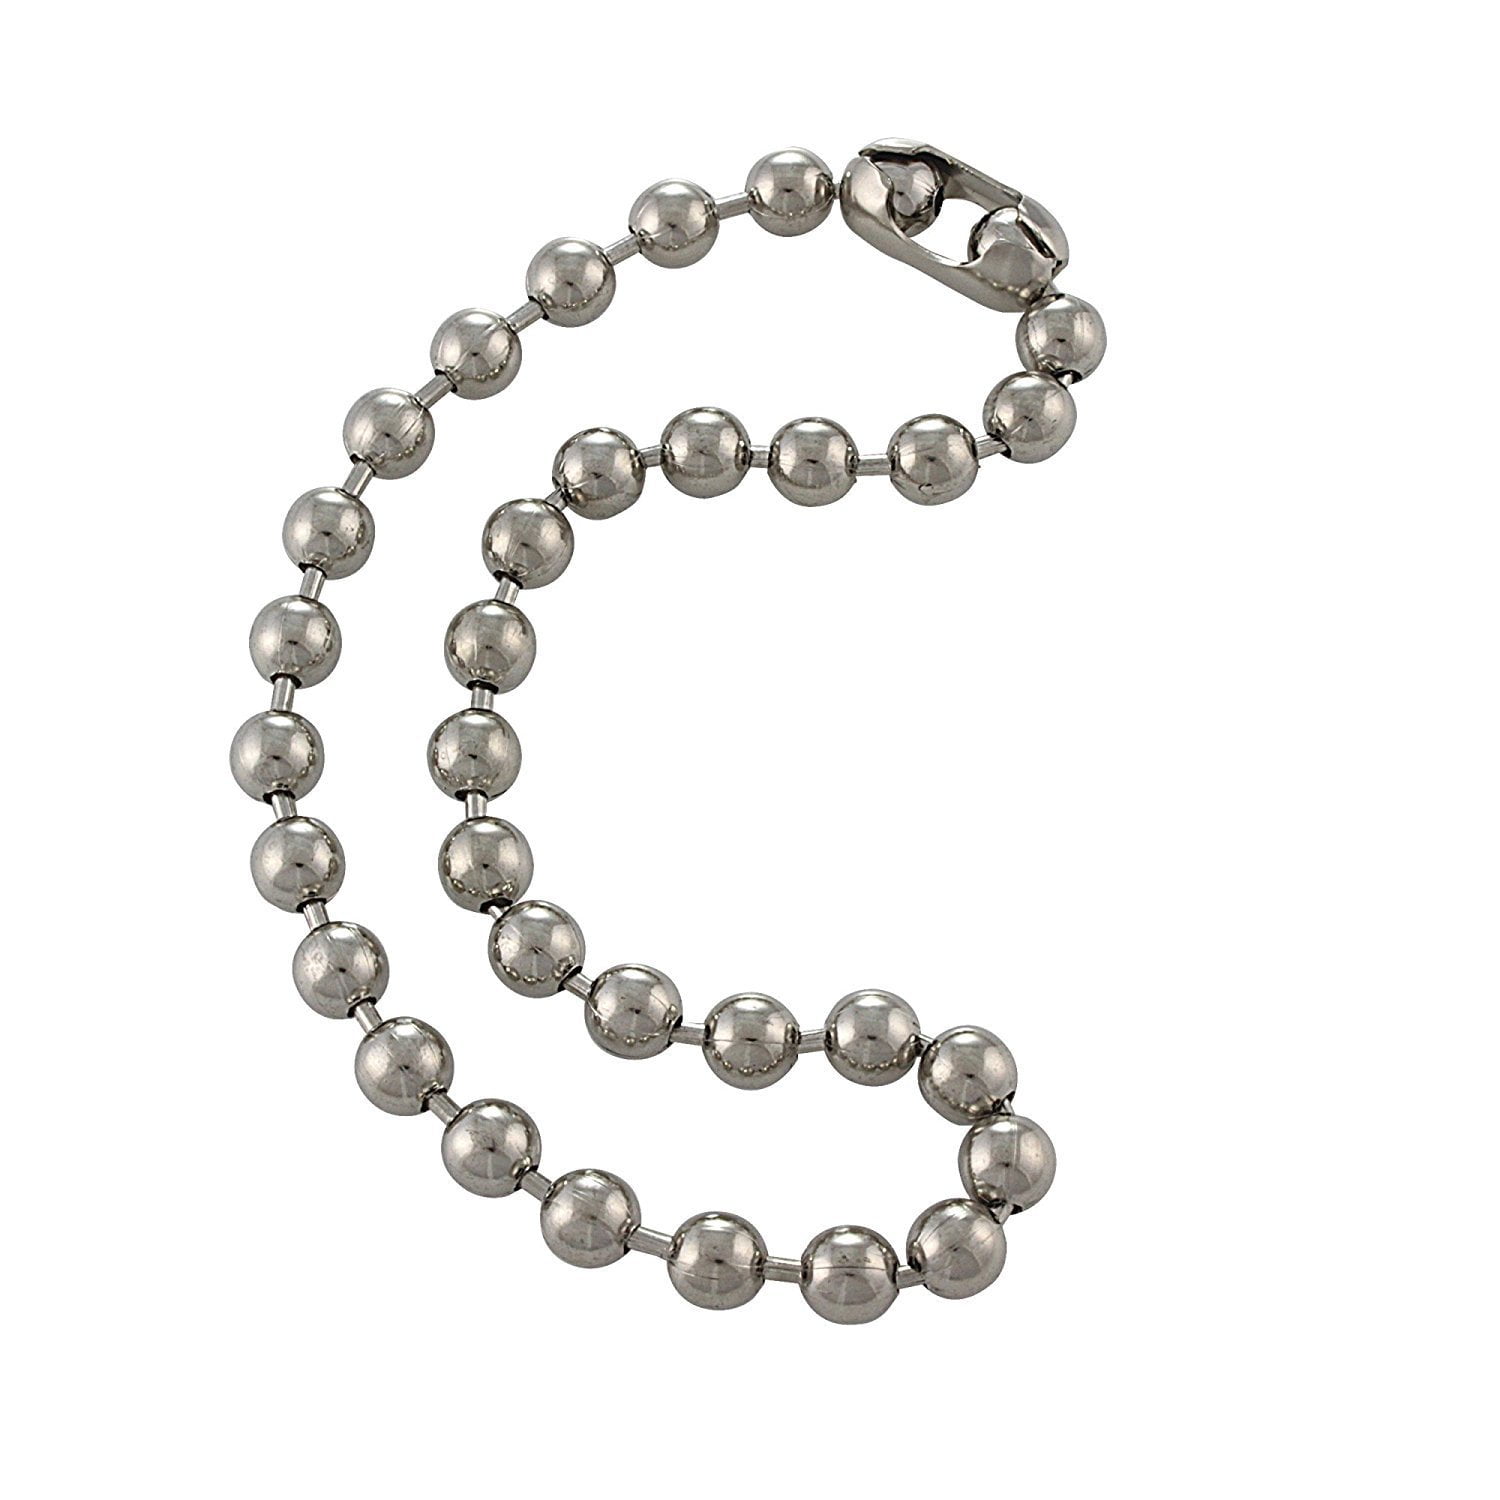 Necklaces Stainless Steel Ball Bead Chain Necklace Chj4070 5mm / 24 Wholesale Jewelry Website Unisex